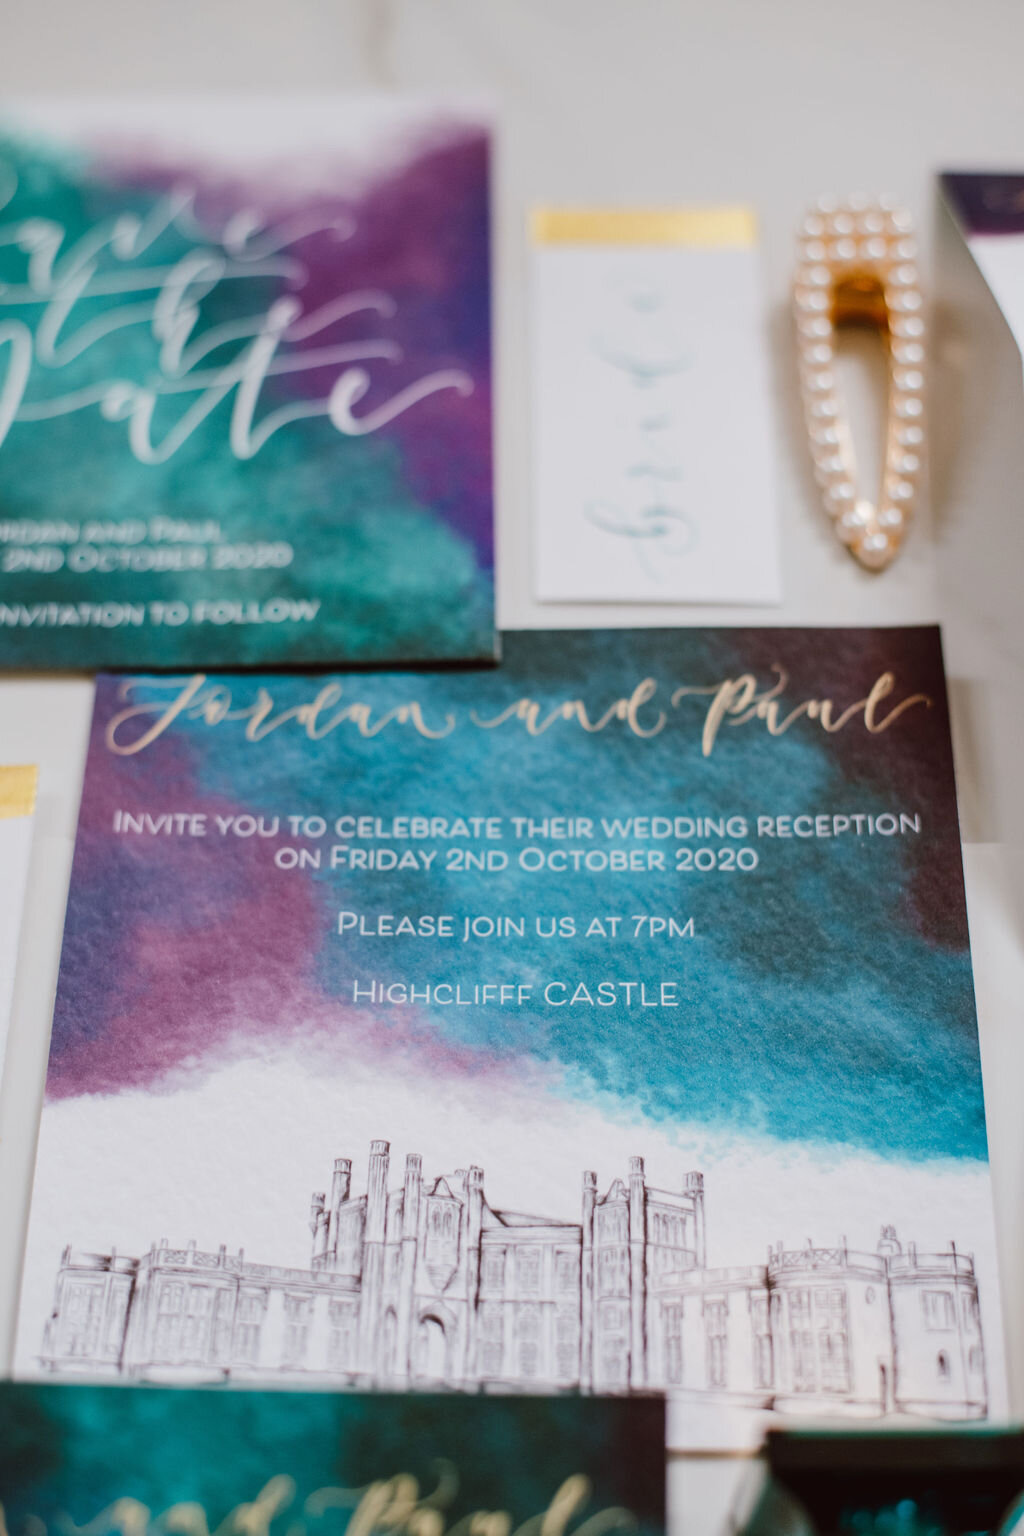 evening invitation Highcliff castle teal, purple and gold watercolour concertina invitations with calligraphy and venue illustration with matching rsvp and save the d.jpg